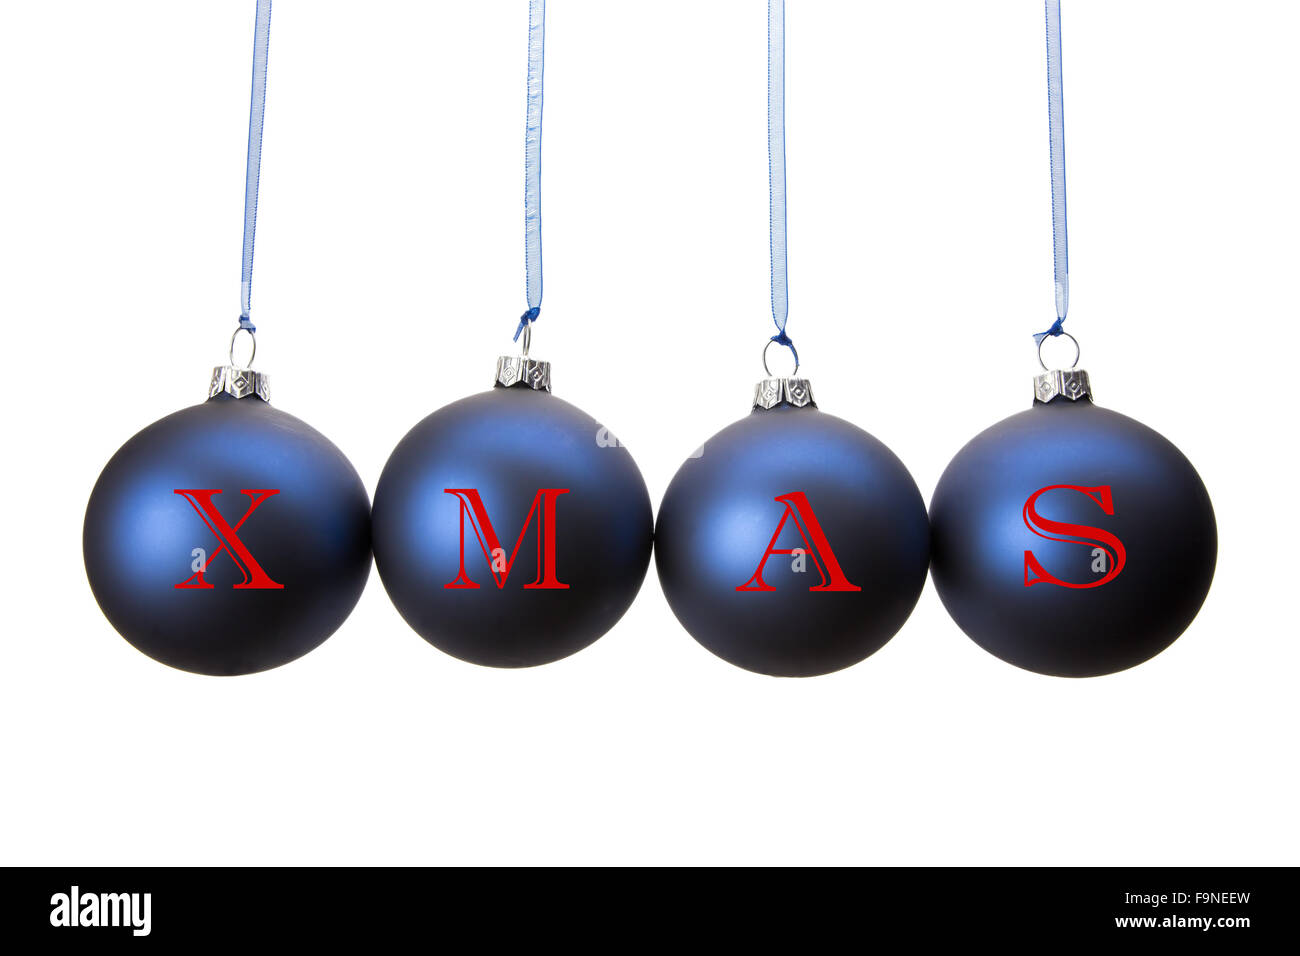 Four blue christmas balls with letters of word XMAS hanging in row isolated on white background Stock Photo